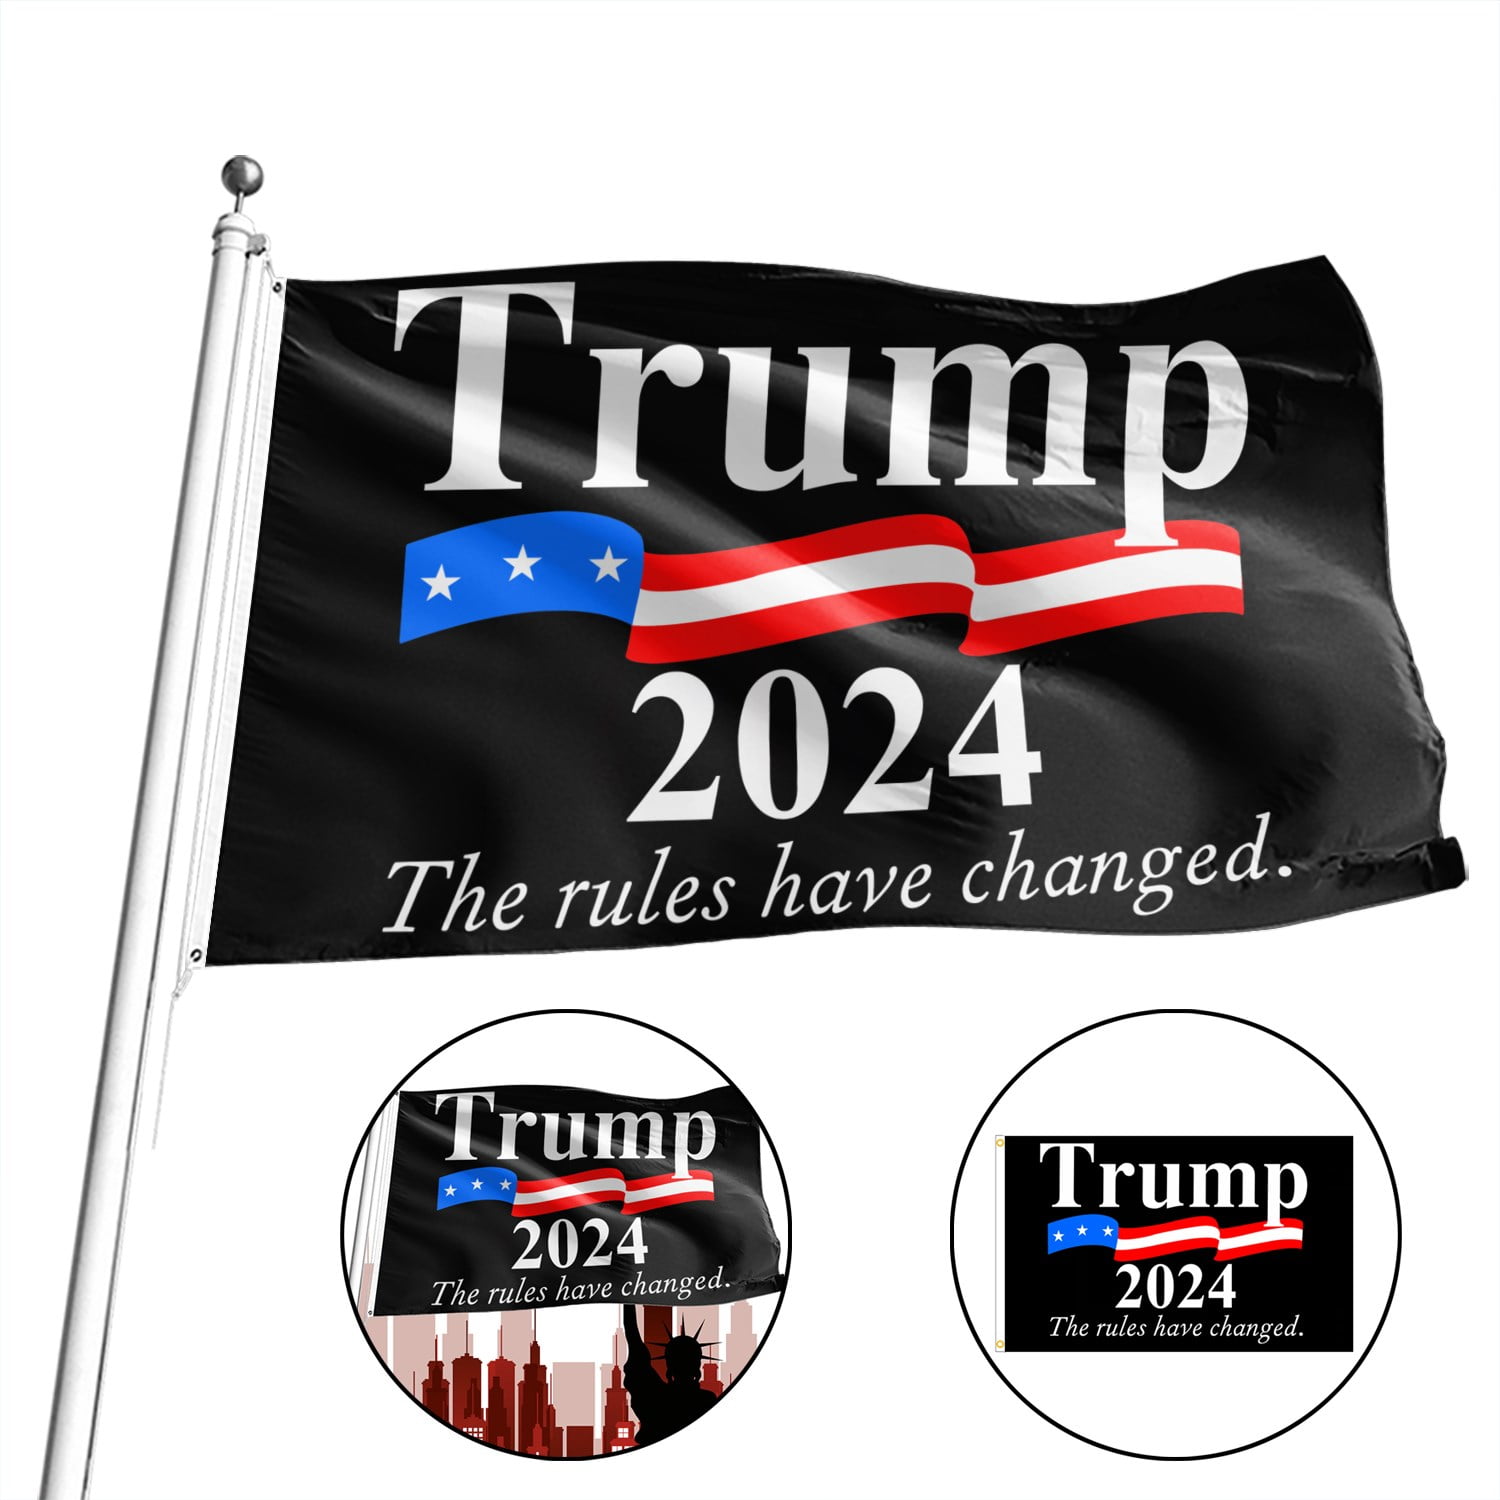 Details about   TRUMP GOD FAMILY COUNTRY 2024 Advertising Vinyl Banner Flag Sign Many Sizes MAGA 